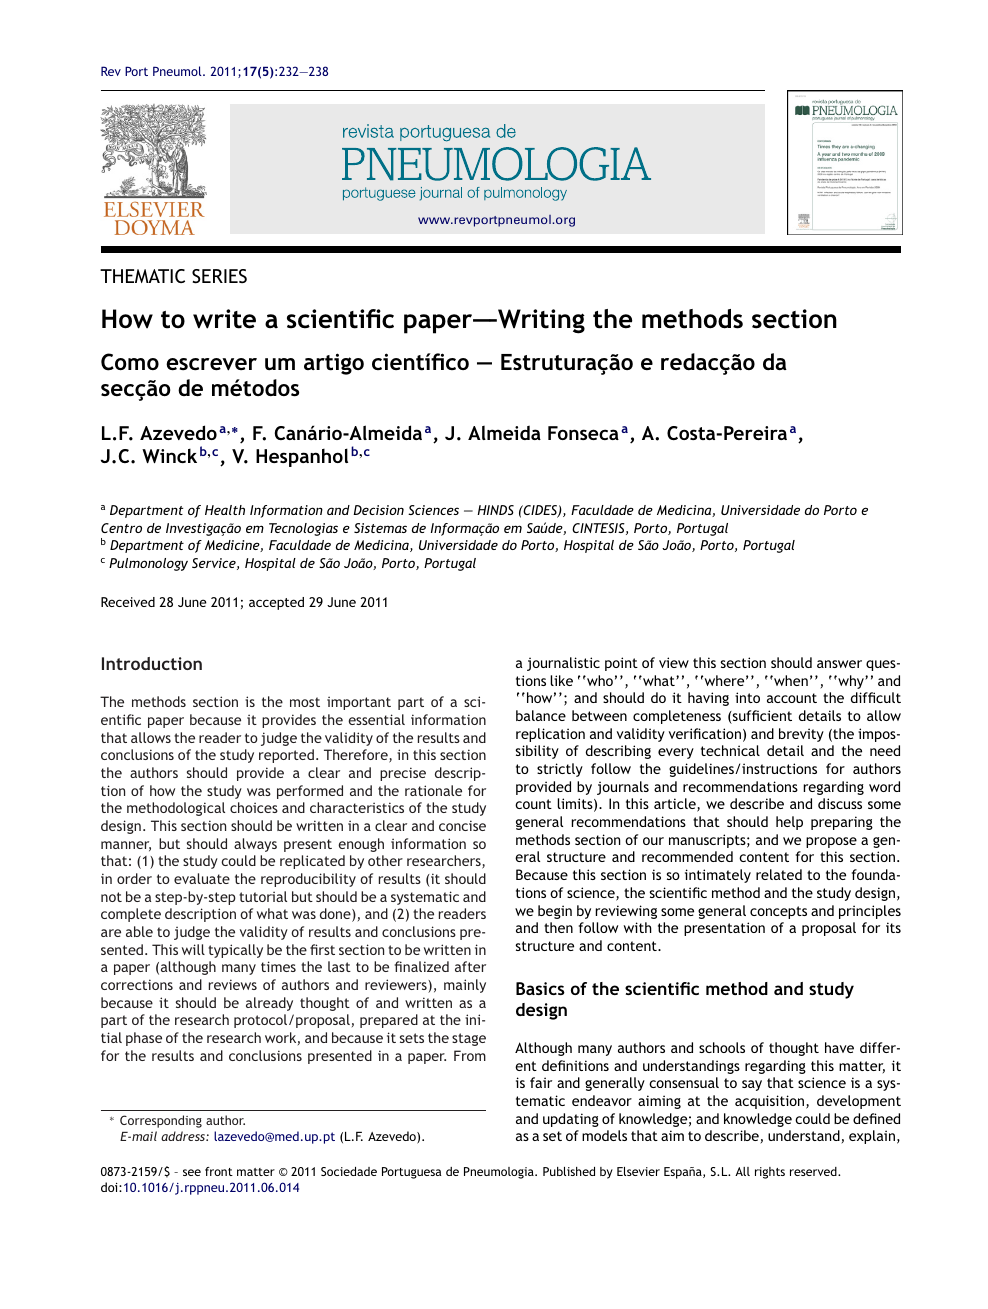 How to write a scientific paper—Writing the methods section